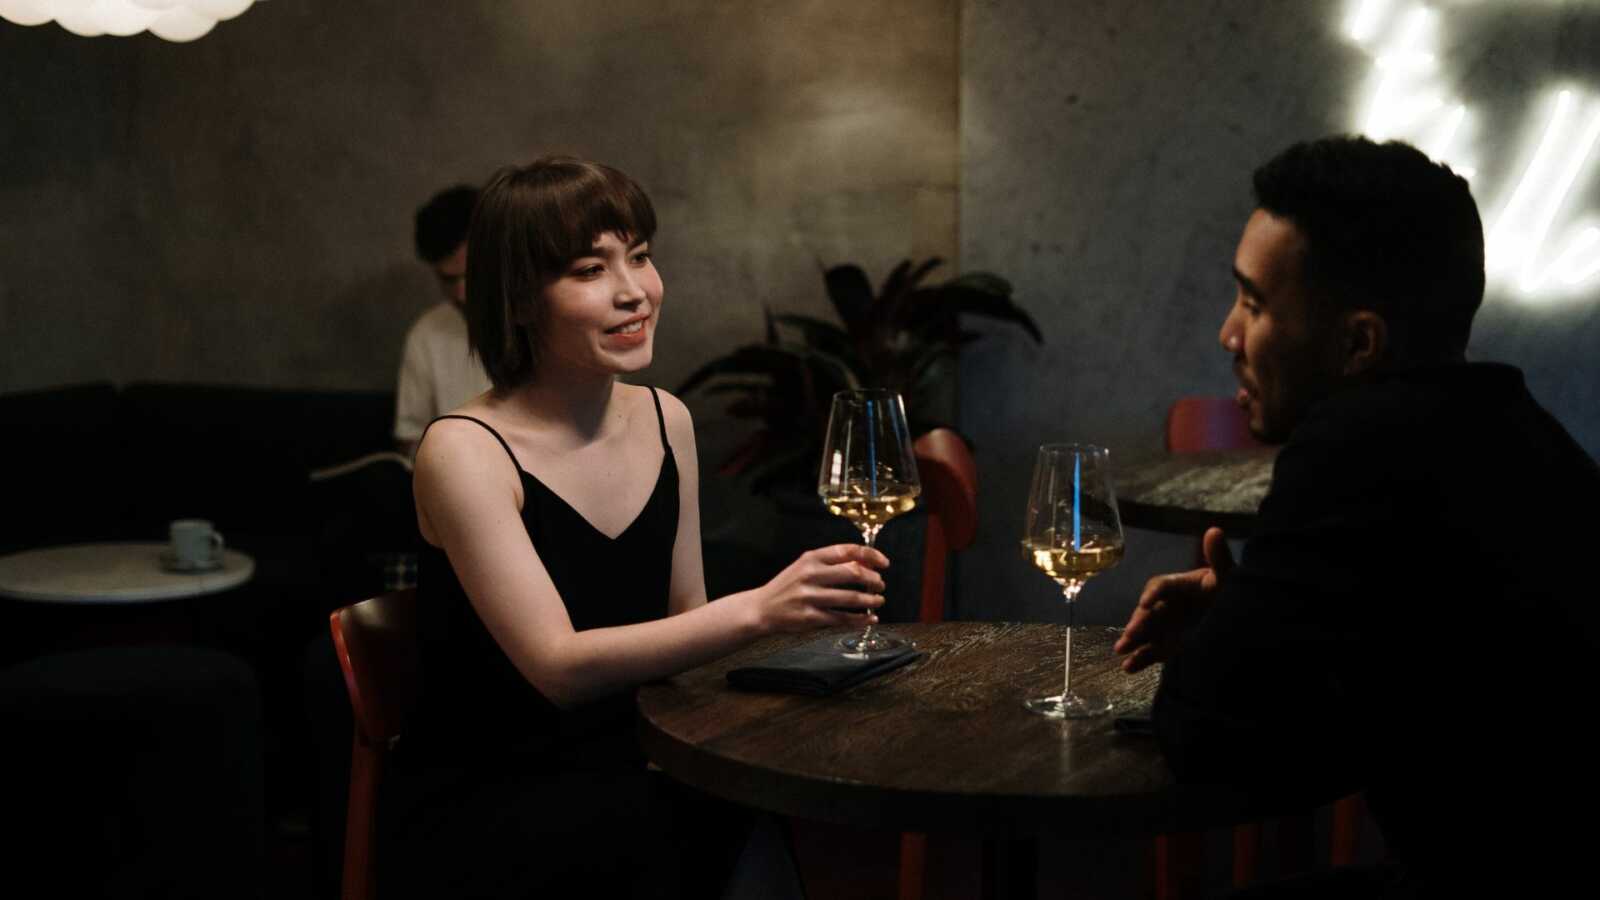 a woman and a man on first date at a wine bar